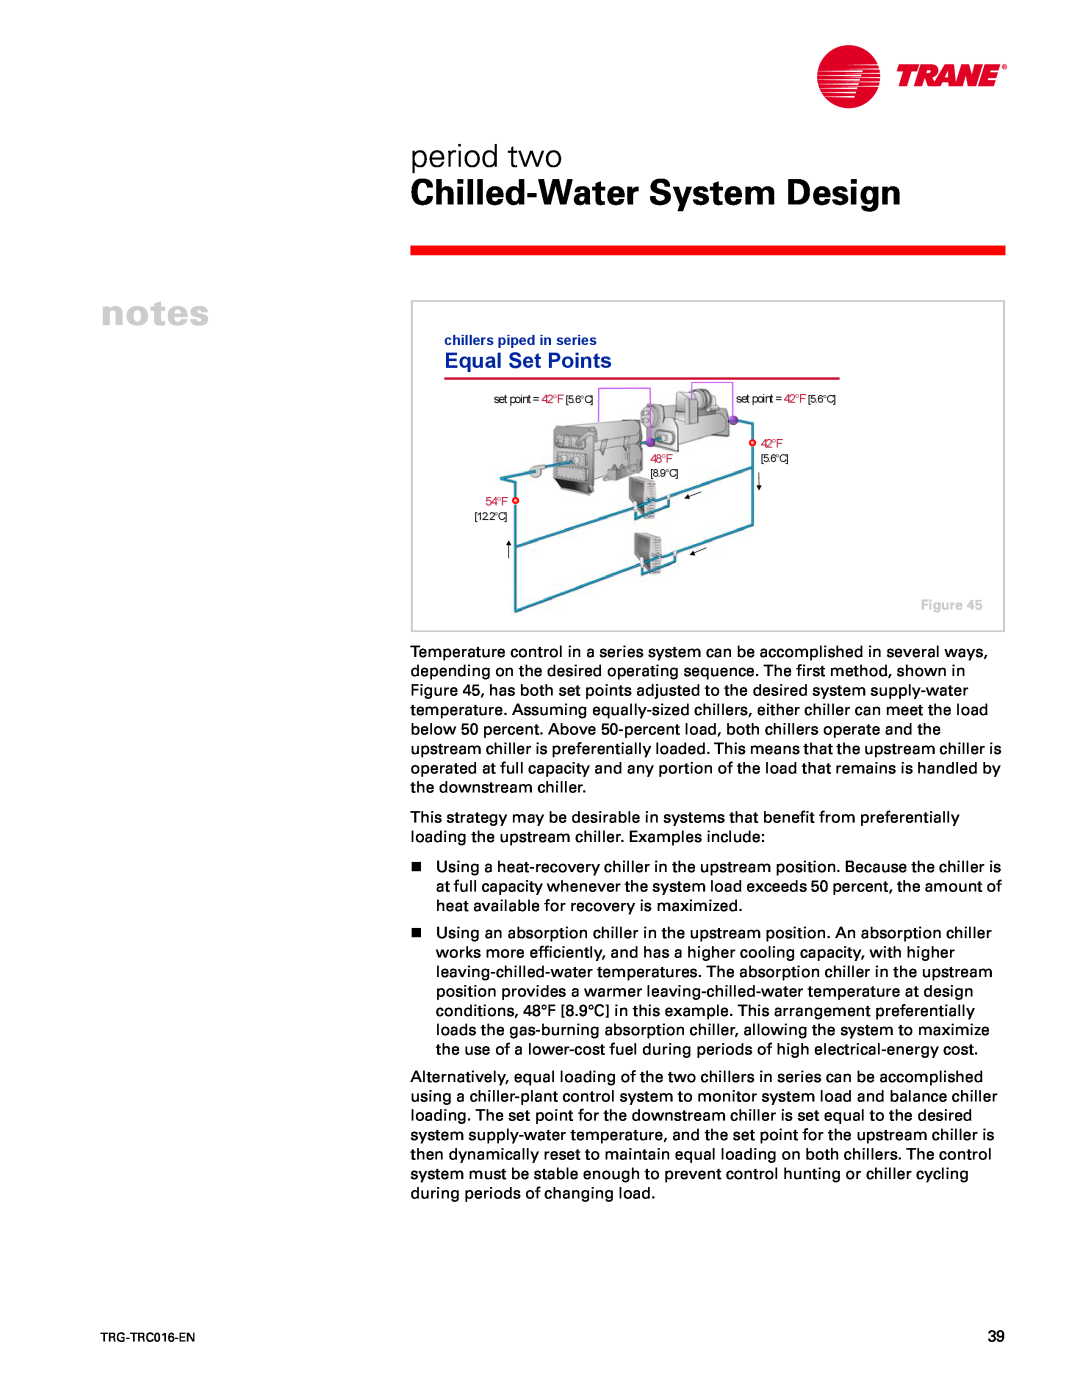 Trane TRG-TRC016-EN manual Equal Set Points, notes, Chilled-WaterSystem Design, period two 